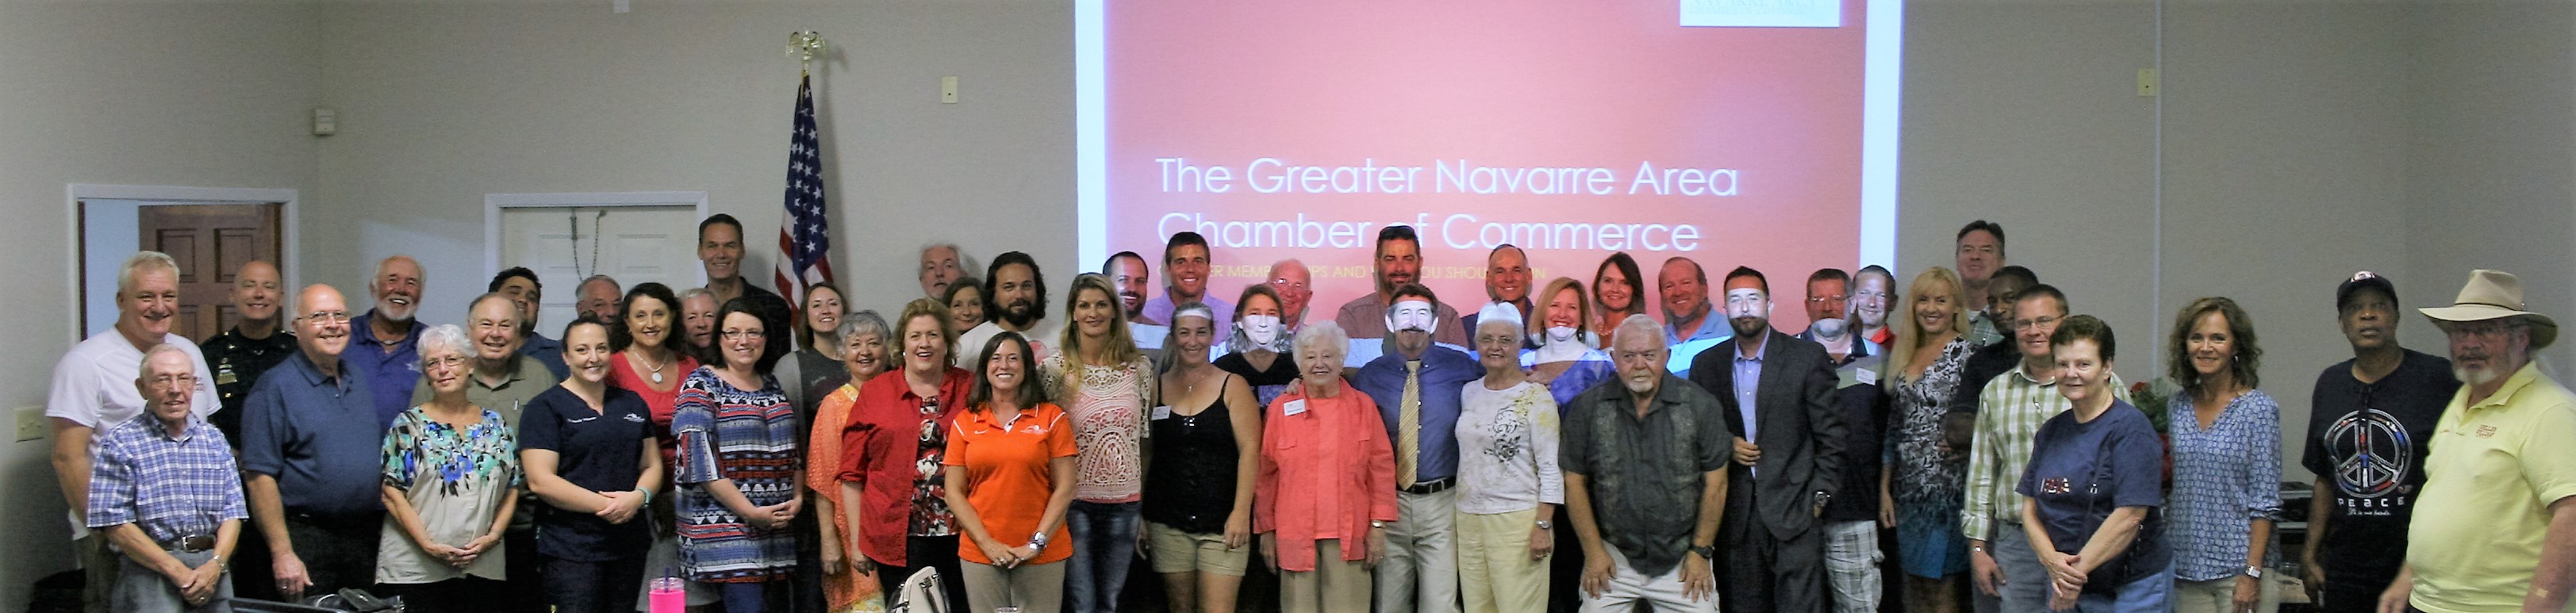 greater-navarre-area-chamber